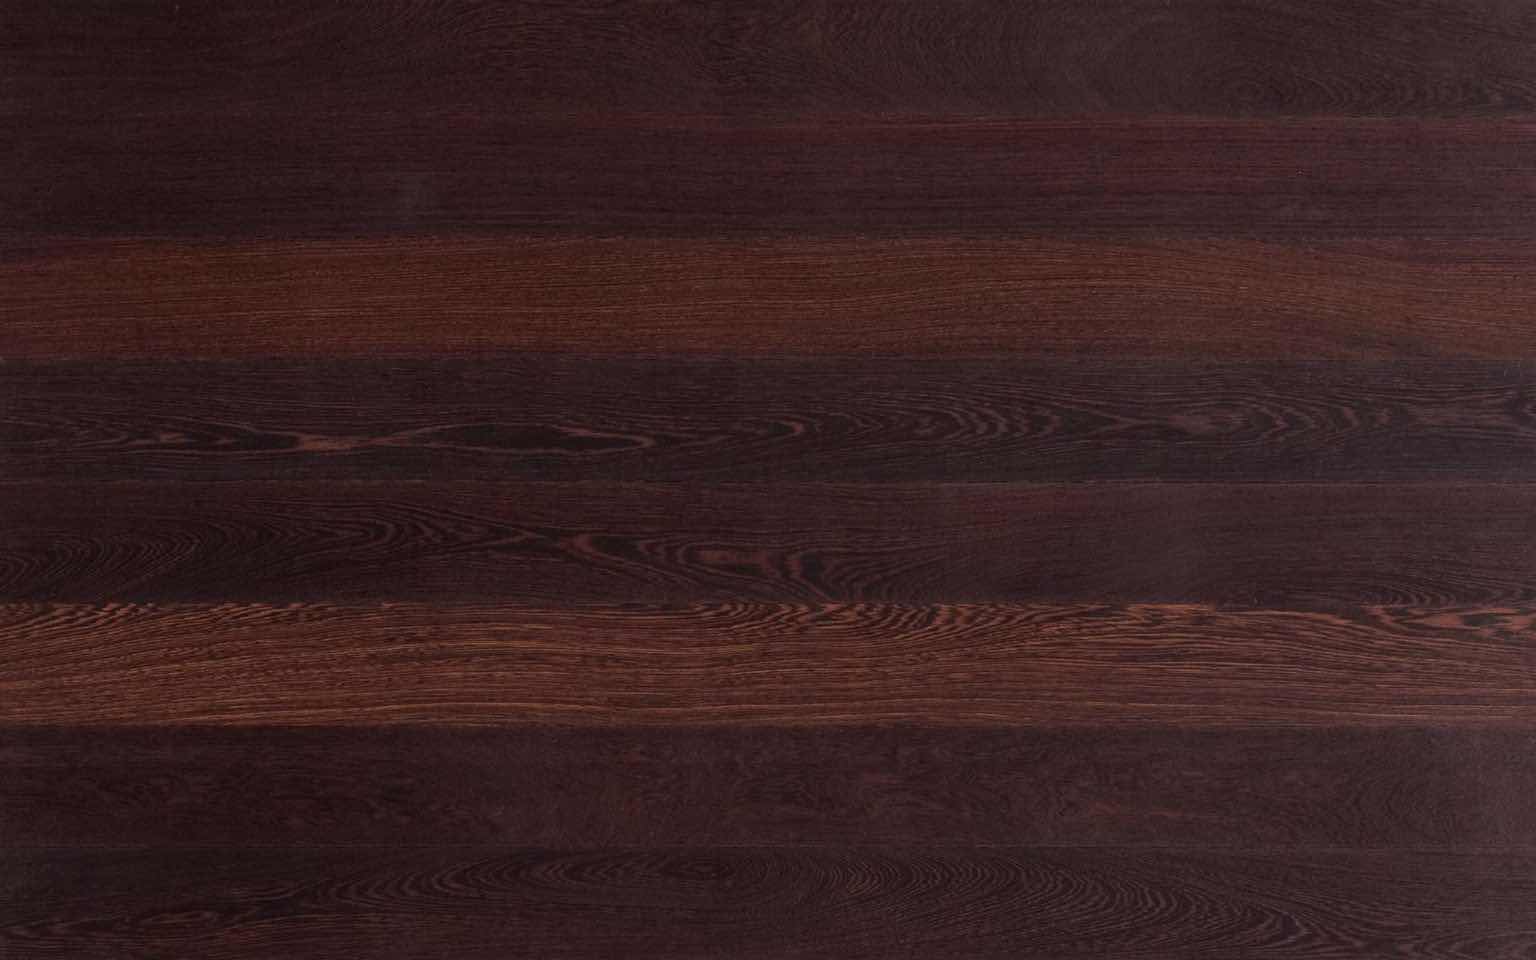 Photo 1 of LISTONE  GIORDANO WENGE WOOD FINISH SNAP ON CLICK PLANK HARDWOOD FLOORING 5” X 47” (13.45sqft PER CASE/3CASES APPROX. 40.35sqft TOTAL)